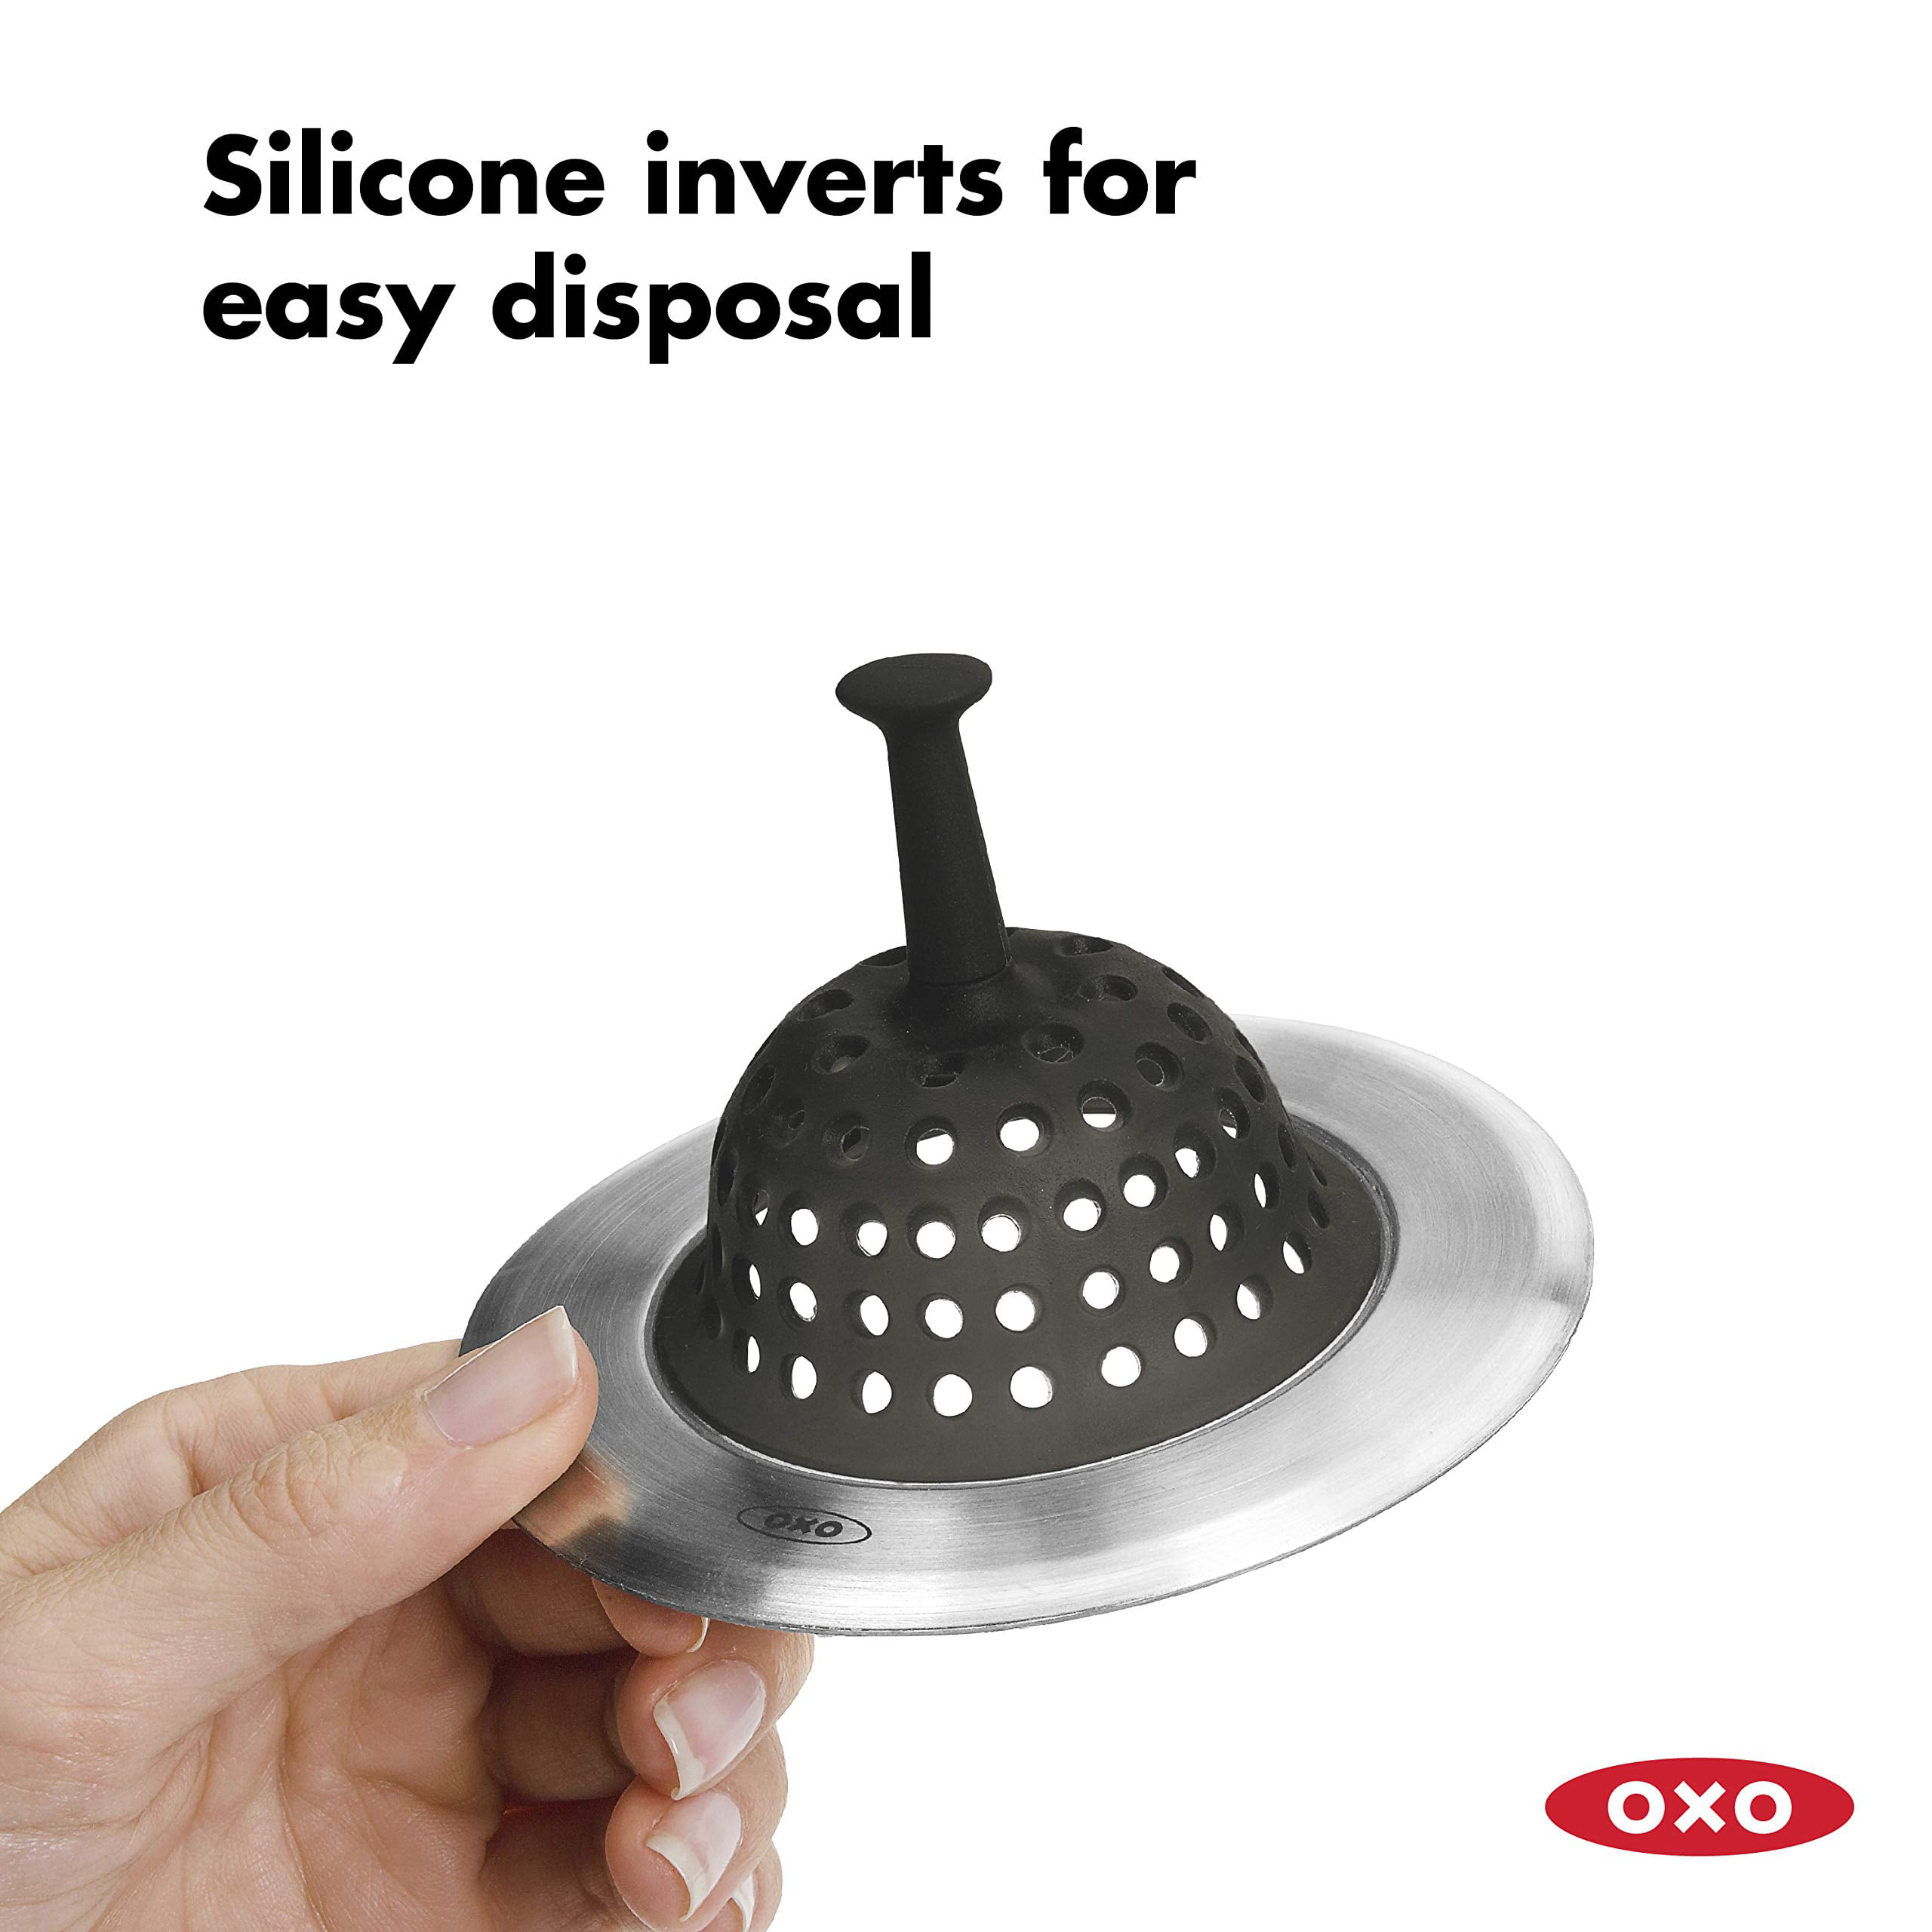 OXO Good Grips Silver Silicone Sink Strainer, 4.37 in - Harris Teeter